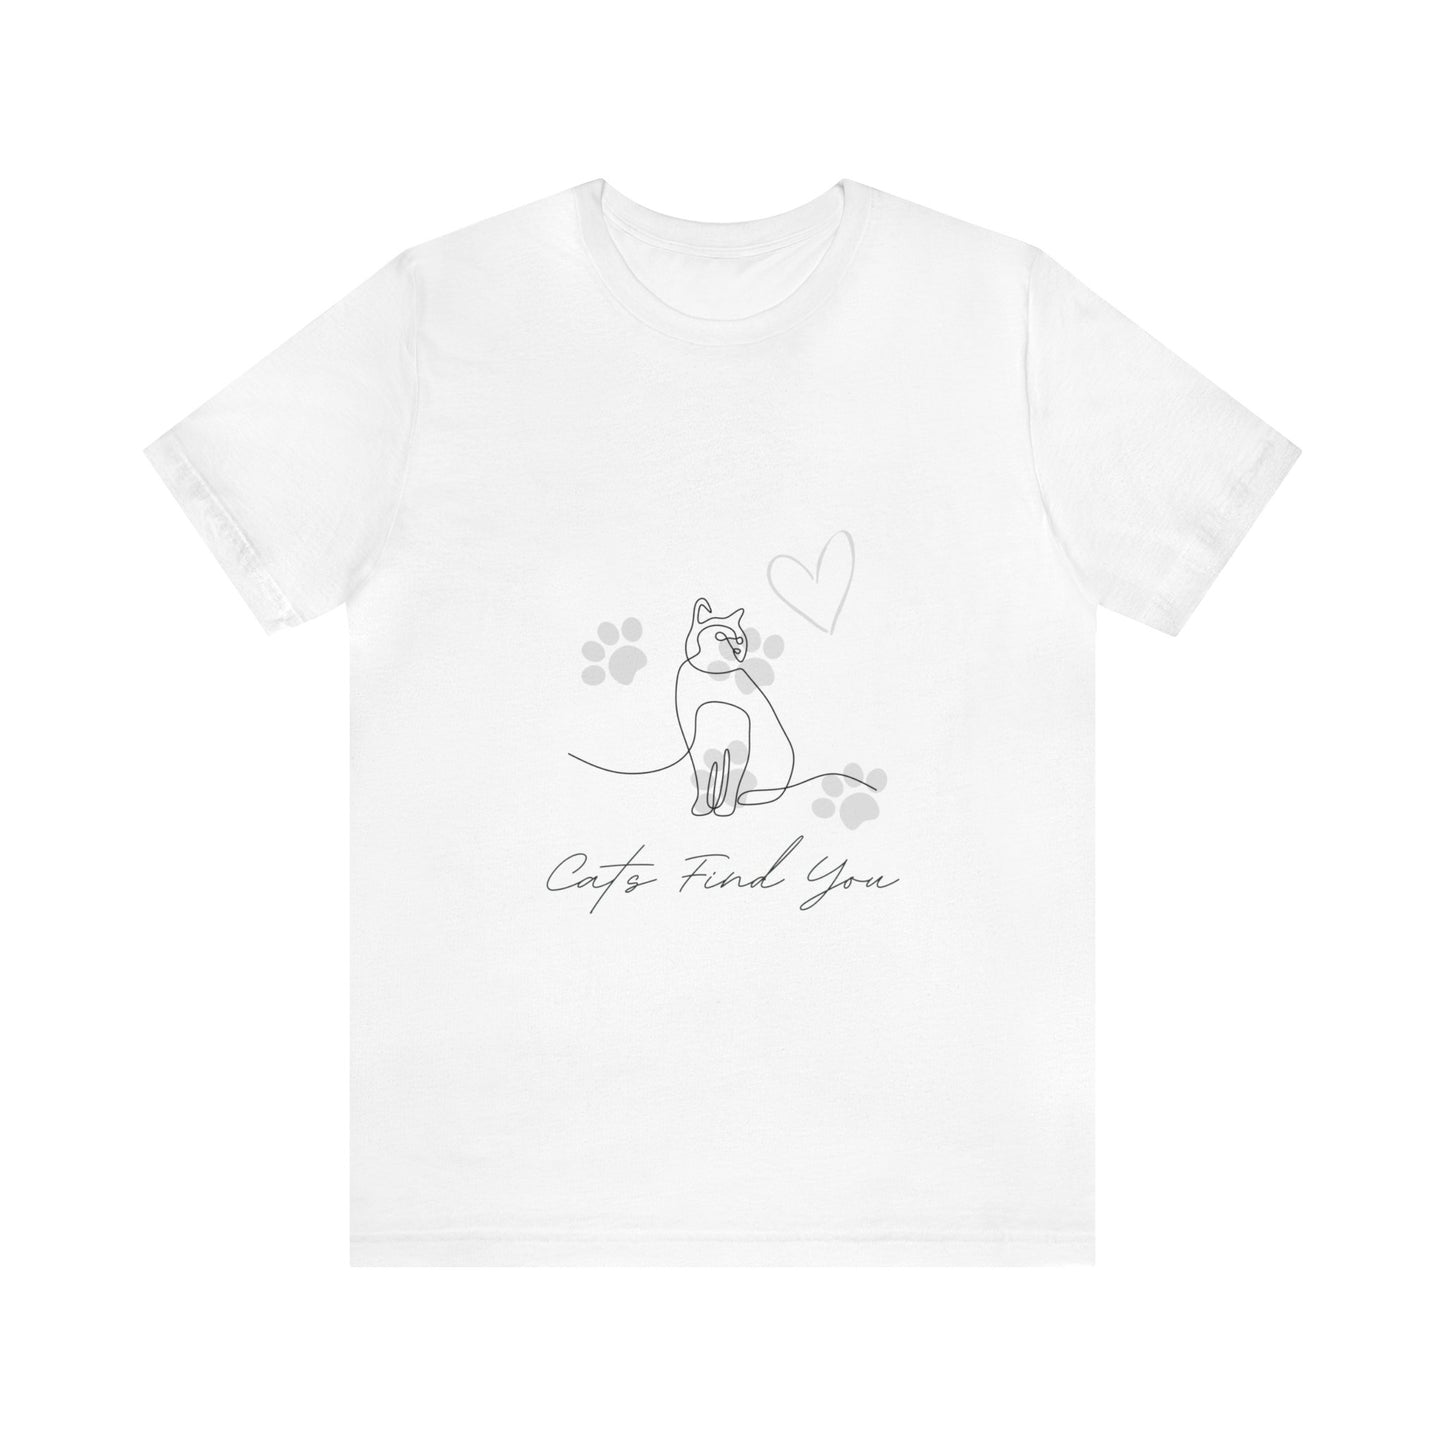 Cats Find You, Super Soft Short Sleeve Tee